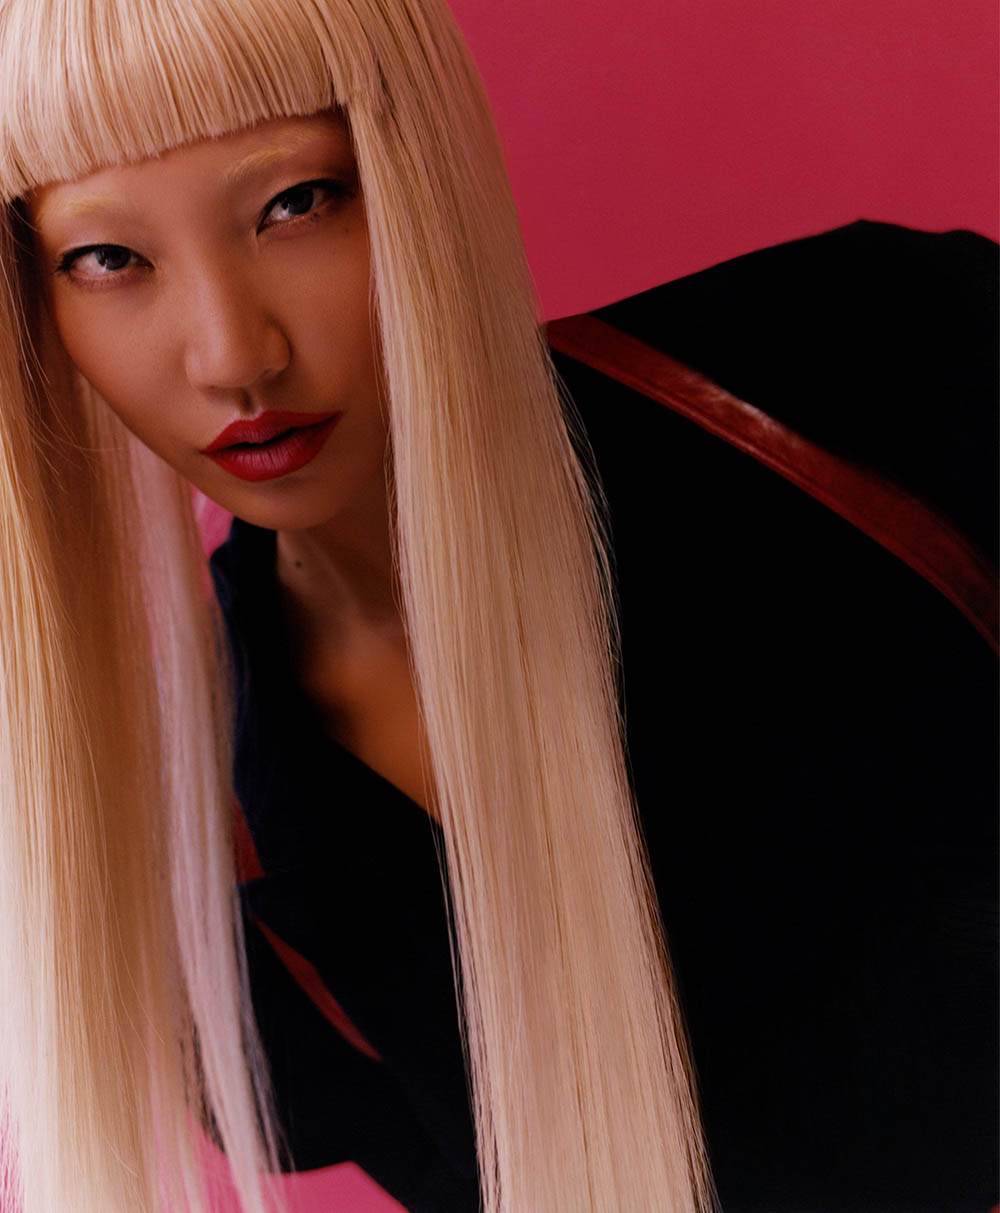 Soo Joo Park covers The WOW Magazine Issue 3 2020 Digital Edition by Peter Ash Lee